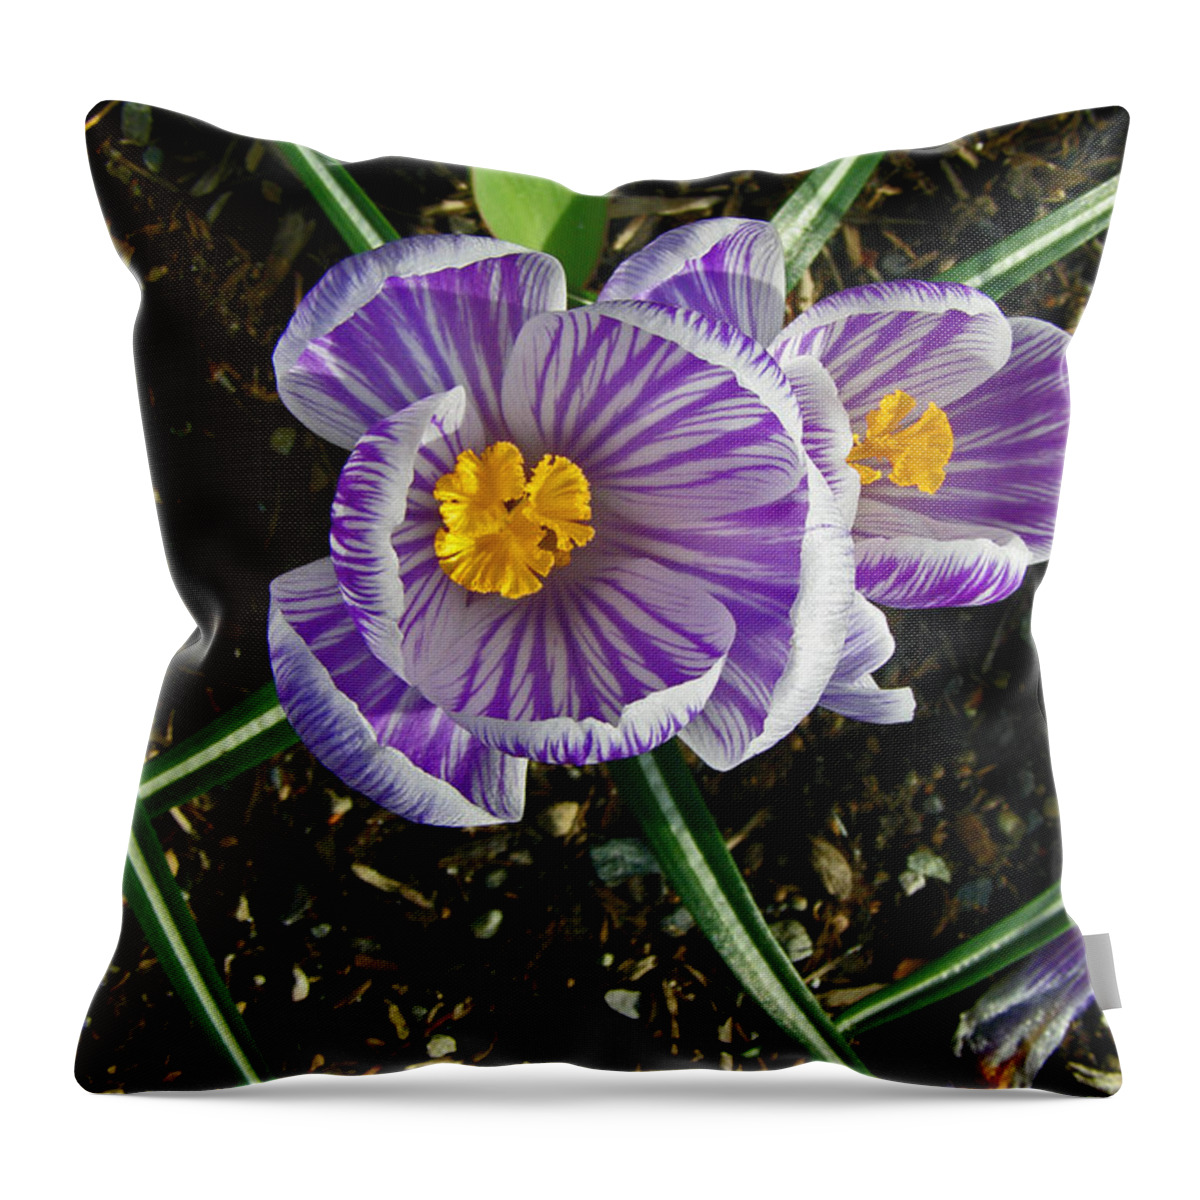 Crocus Throw Pillow featuring the photograph Striped Crocus by Tikvah's Hope